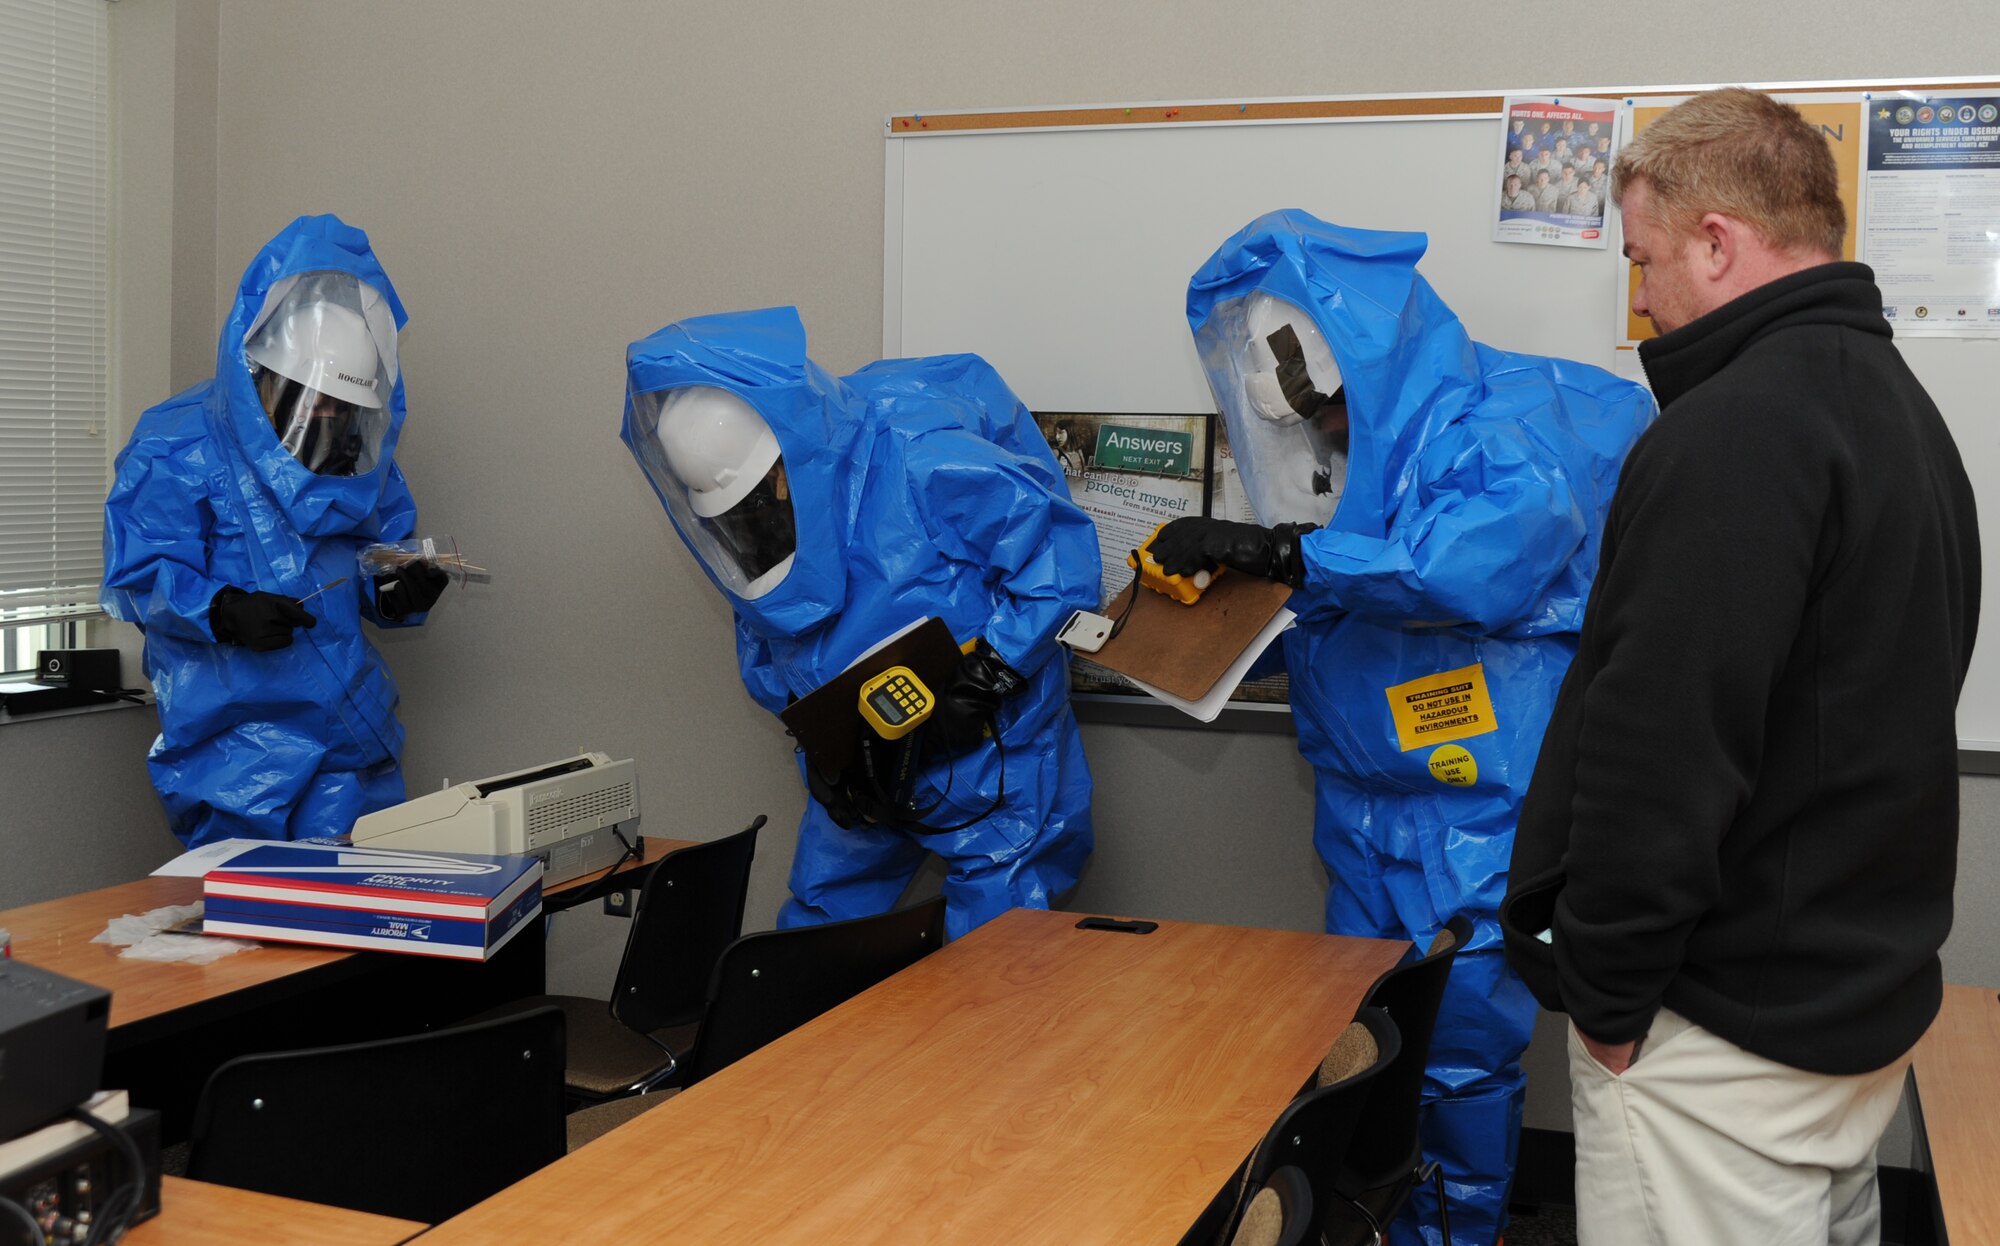 From left: Staff Sgt. Chris Clark, 241st Engineering Installation Squadron, 118th AW, Senior Airman Tiffany Hogeland, 118th Civil Engineering, and Staff Sgt. Joshua Dow, 118th Bioenvironmental Engineering, assess the room and take readings of the air quality before taking a sample of an "unknown" substance on the table that was simulated to have come from the mail package Jan. 26 during the National Guard Bureau's all hazard response training that took place at the base Jan. 24-28. Far right: a member of L3, which was contracted by NGB, watches the team in action and helps them learn to use the equipment.